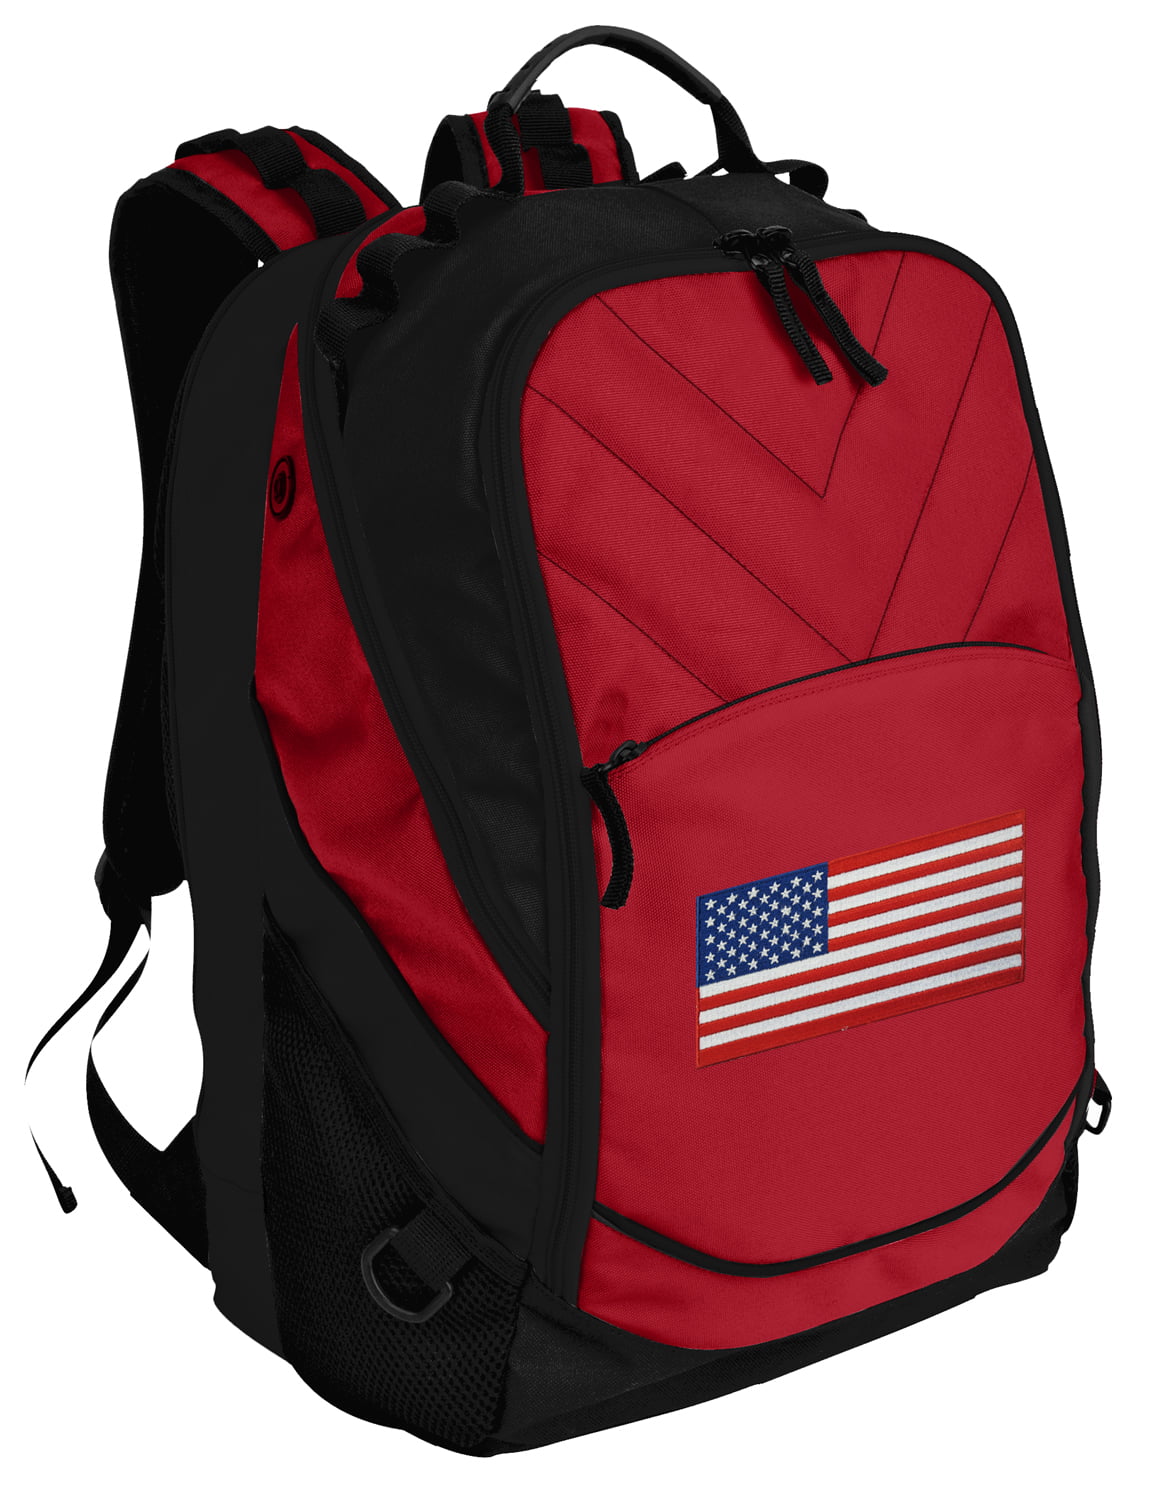 American Flag with Eagle Daypack Backpack School College Travel Hiking Fashion Laptop Backpack for Women Men Teen Casual Schoolbags Canvas